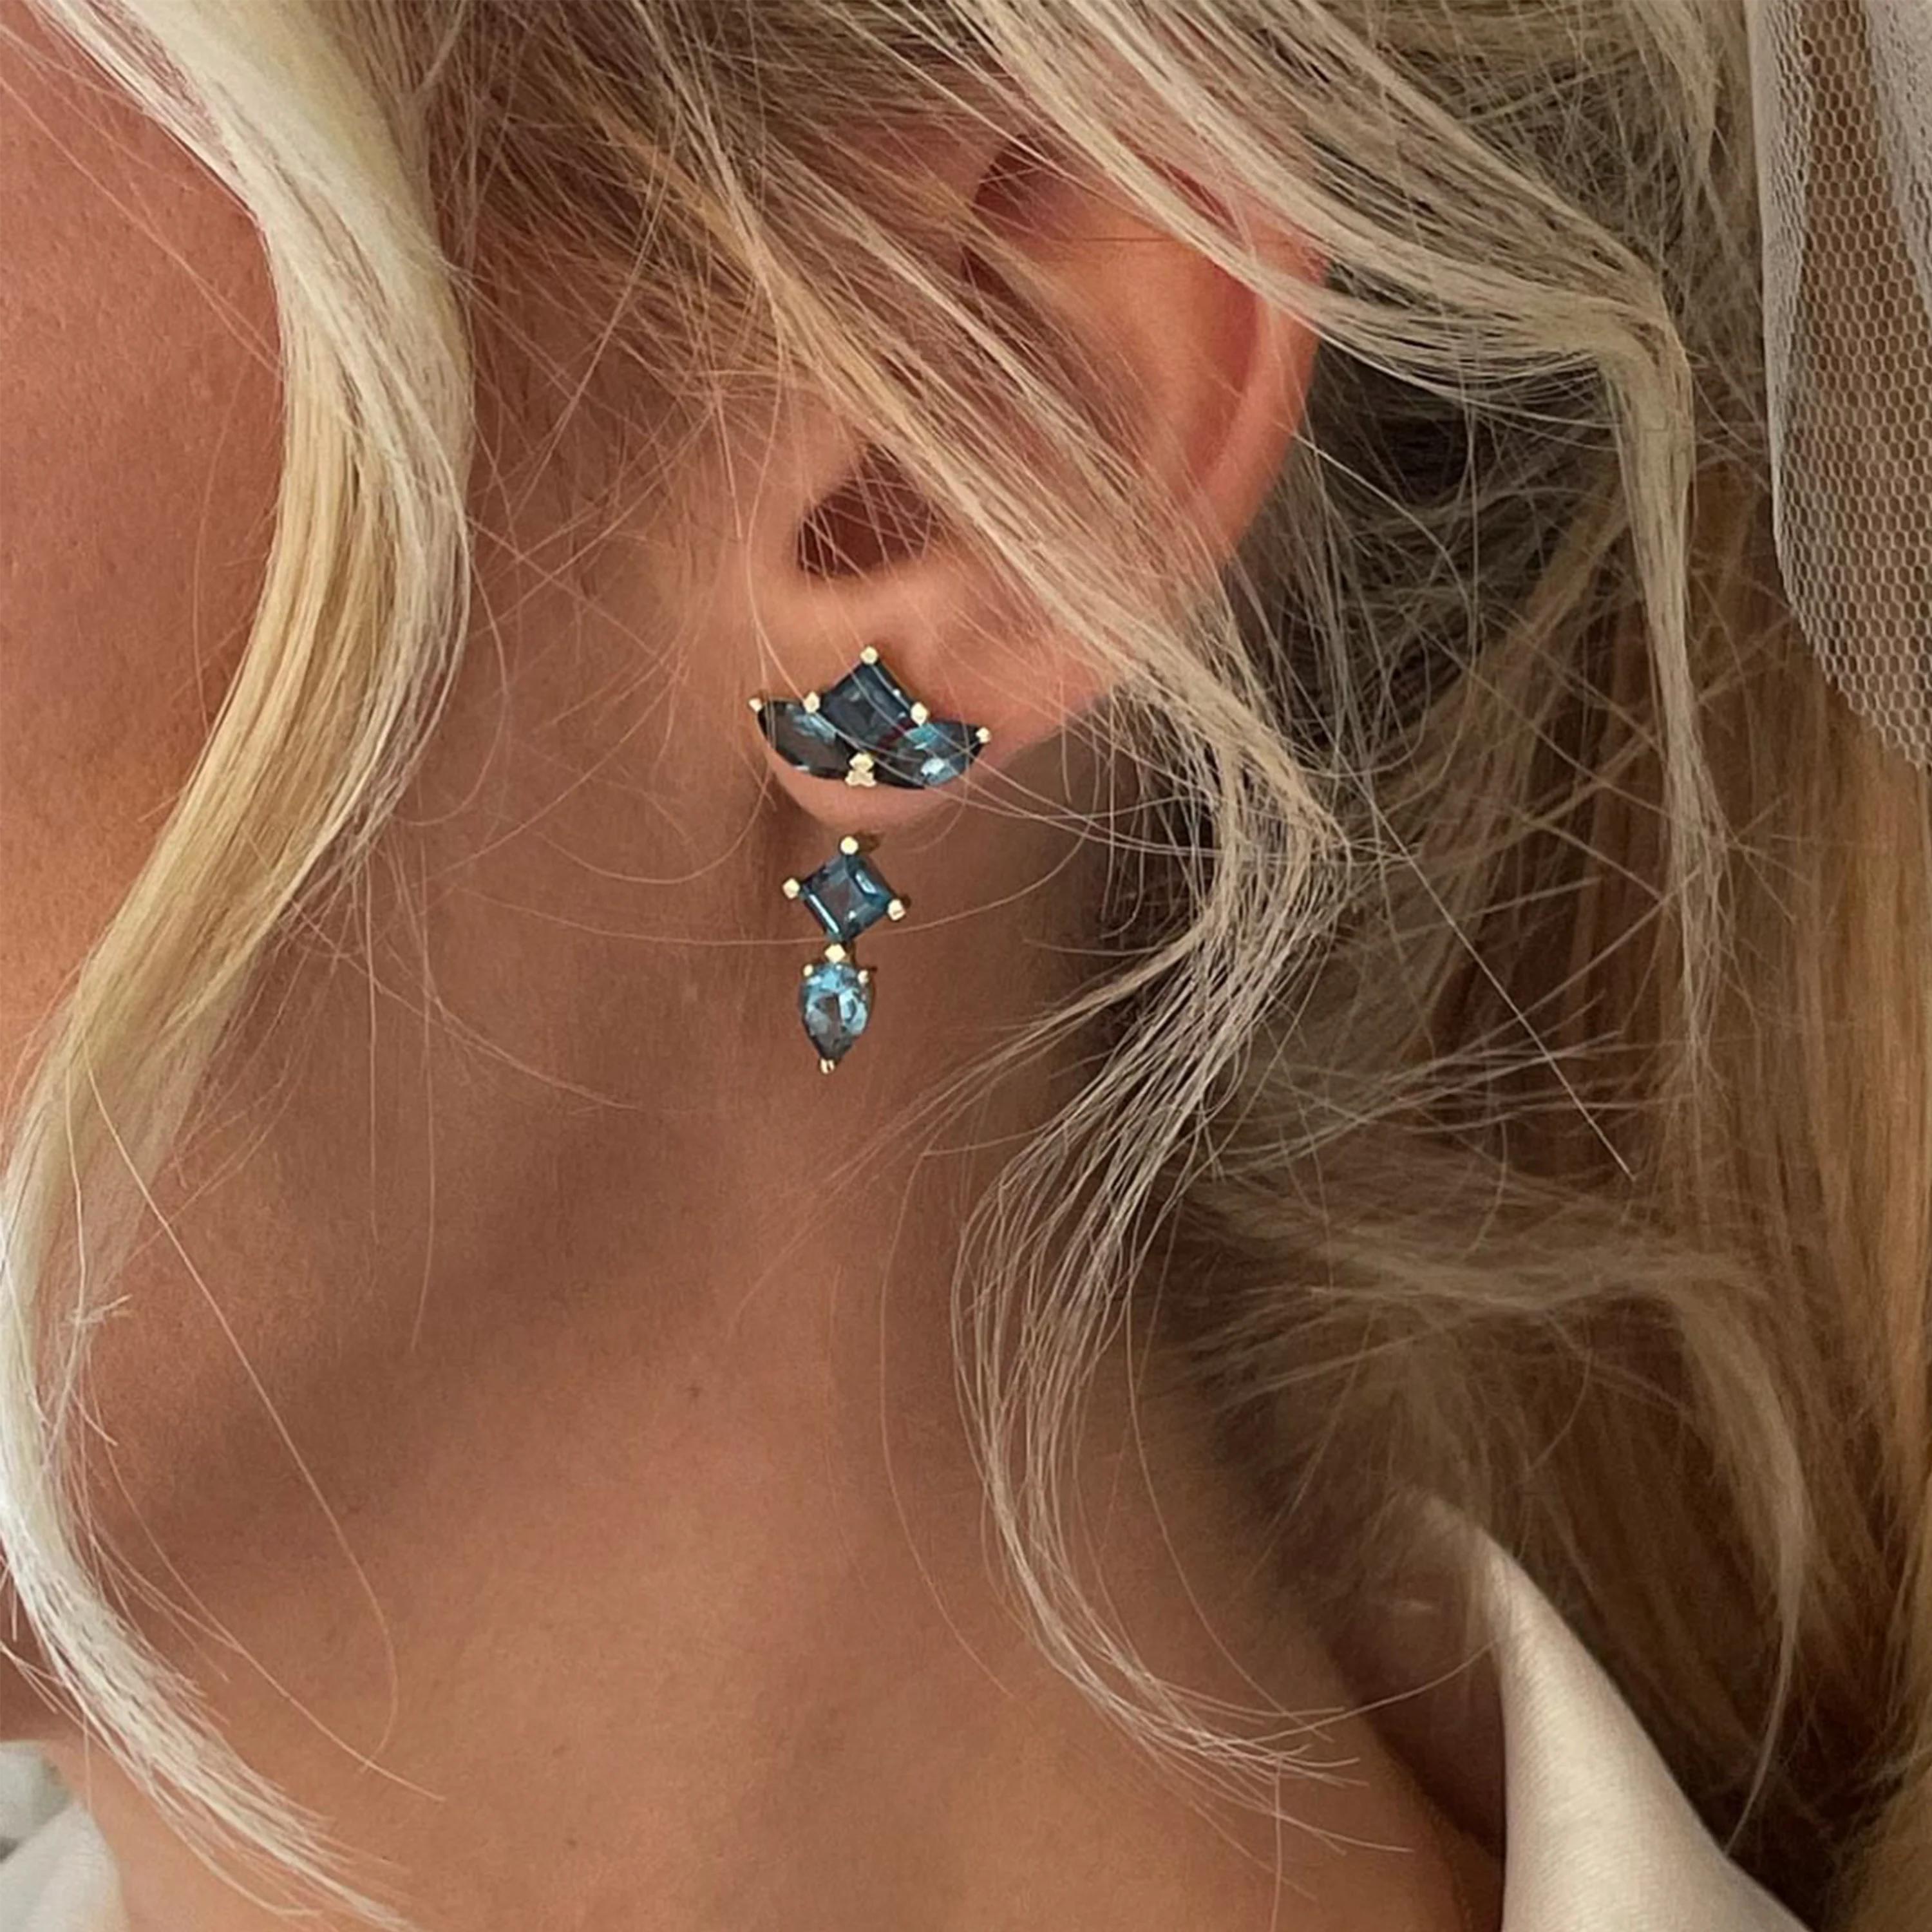 18k yellow gold earring jackets in 3.69ct blue topaz.

Sold as single, these detachable earring jackets offer the perfect opportunity to elevate your style and mix and match with your favorite earrings.